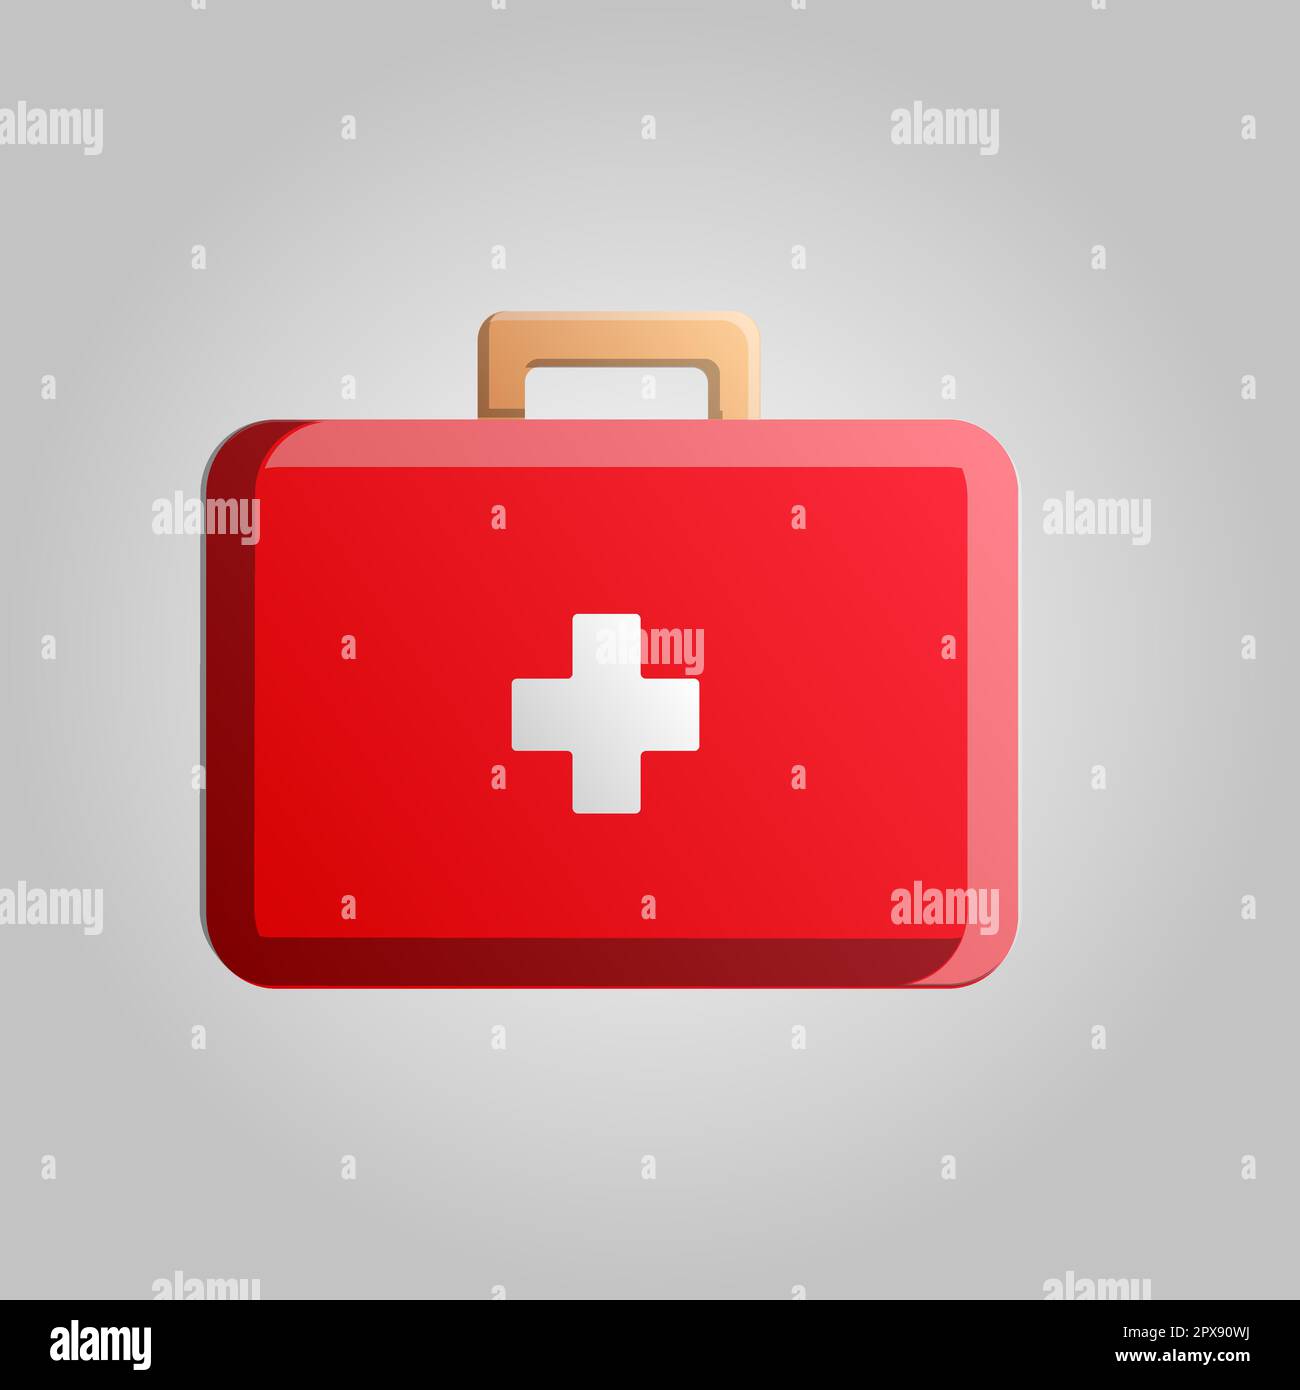 Beautiful red medical first aid kit icon with a cross for healing wounds on a white background. Stock Vector